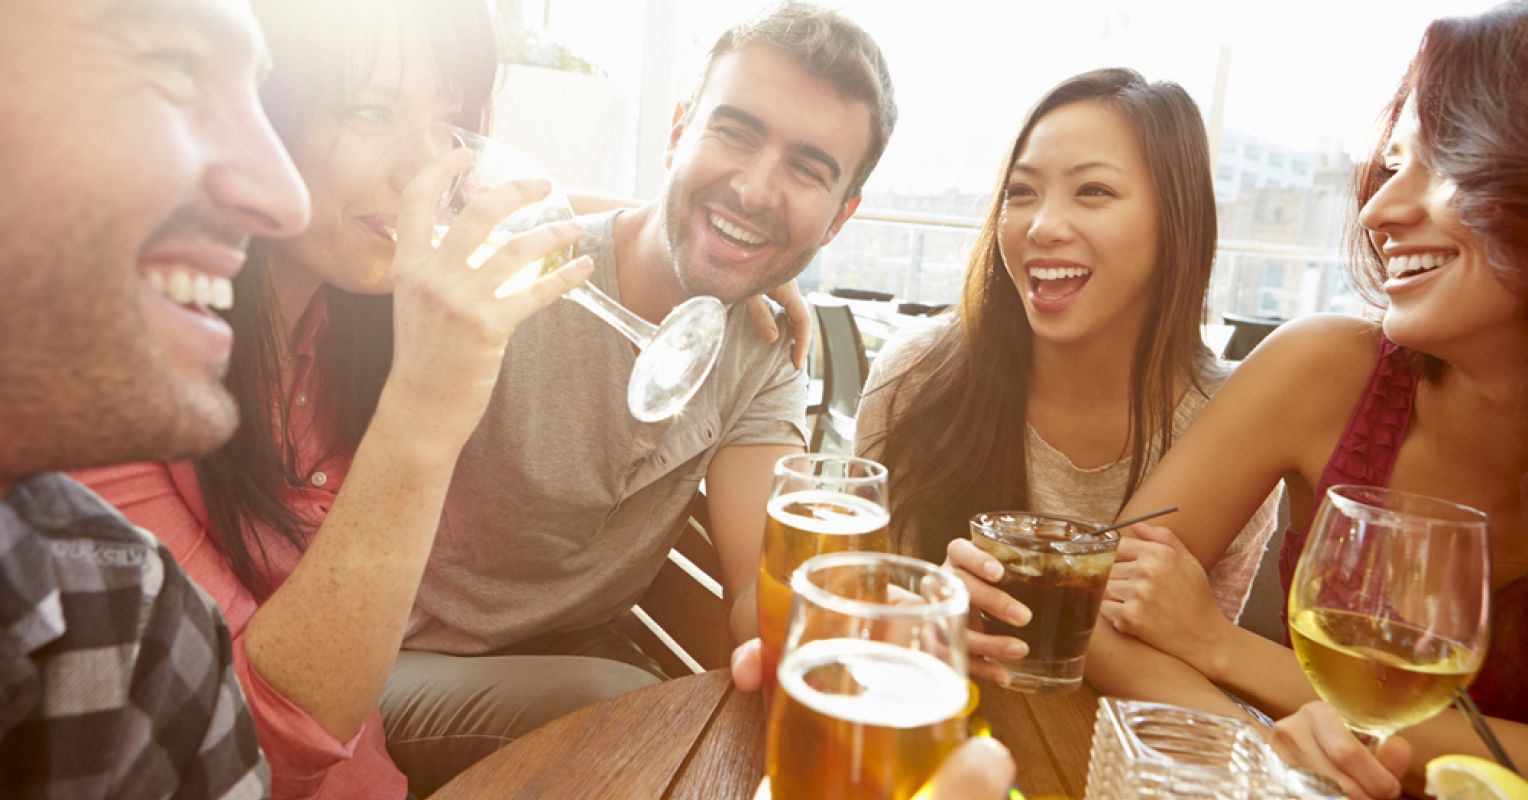 Why Do People Drink? | Psychology Today United Kingdom